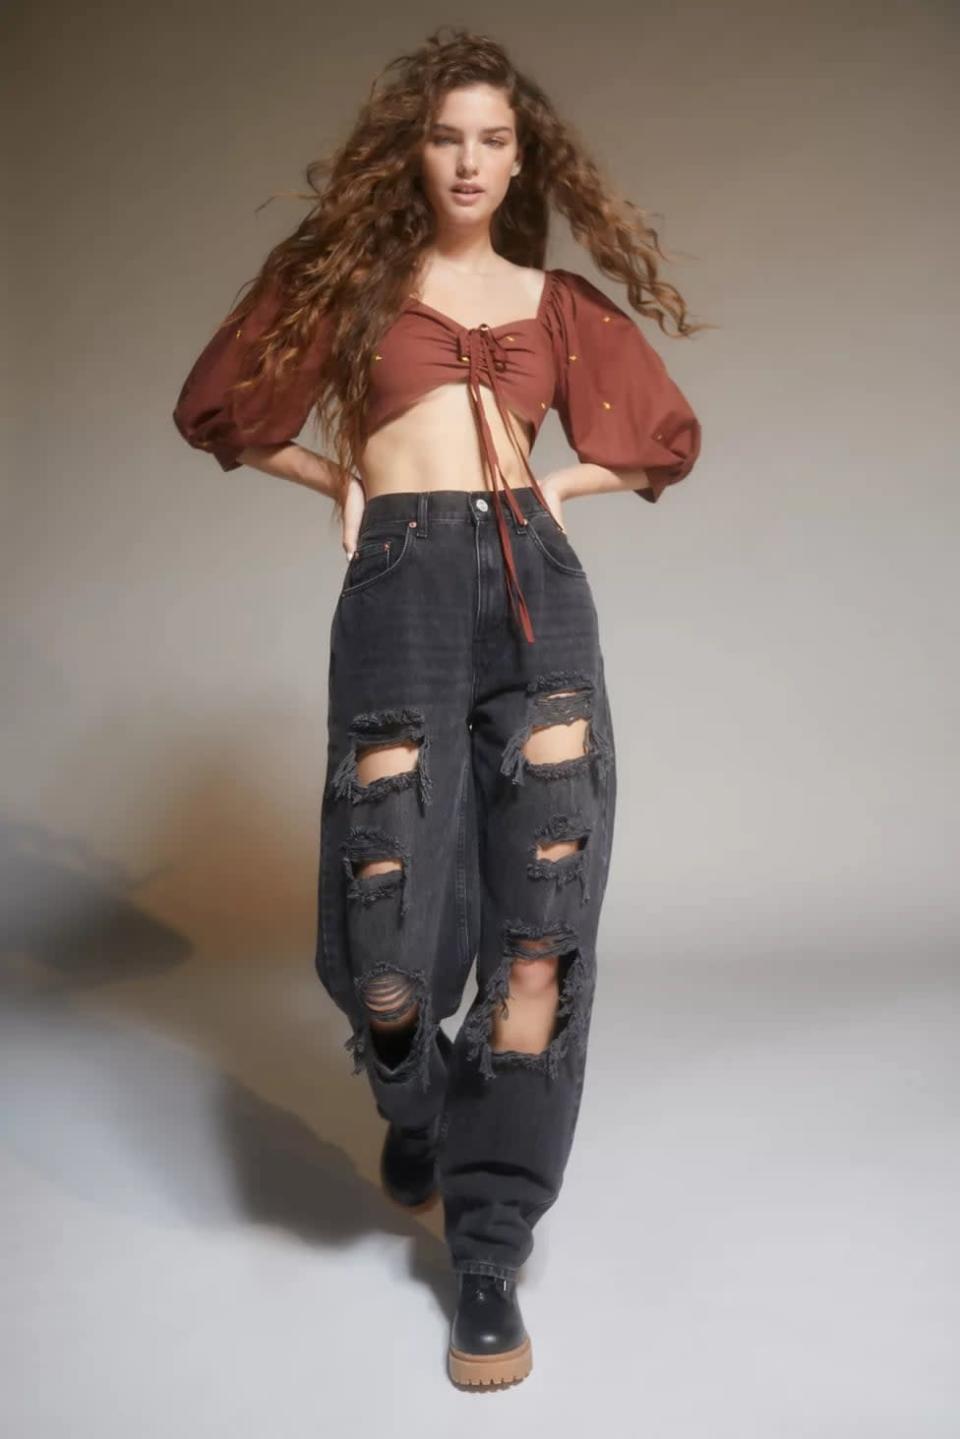 <p>Get yourself a pair of baggy, distressed denim, and thank us later. We want these cool, affordable <span>BDG High-Waisted Baggy Jeans</span> ($49) in every color. Pair them with a tight cropped top and oversize jacket.</p>